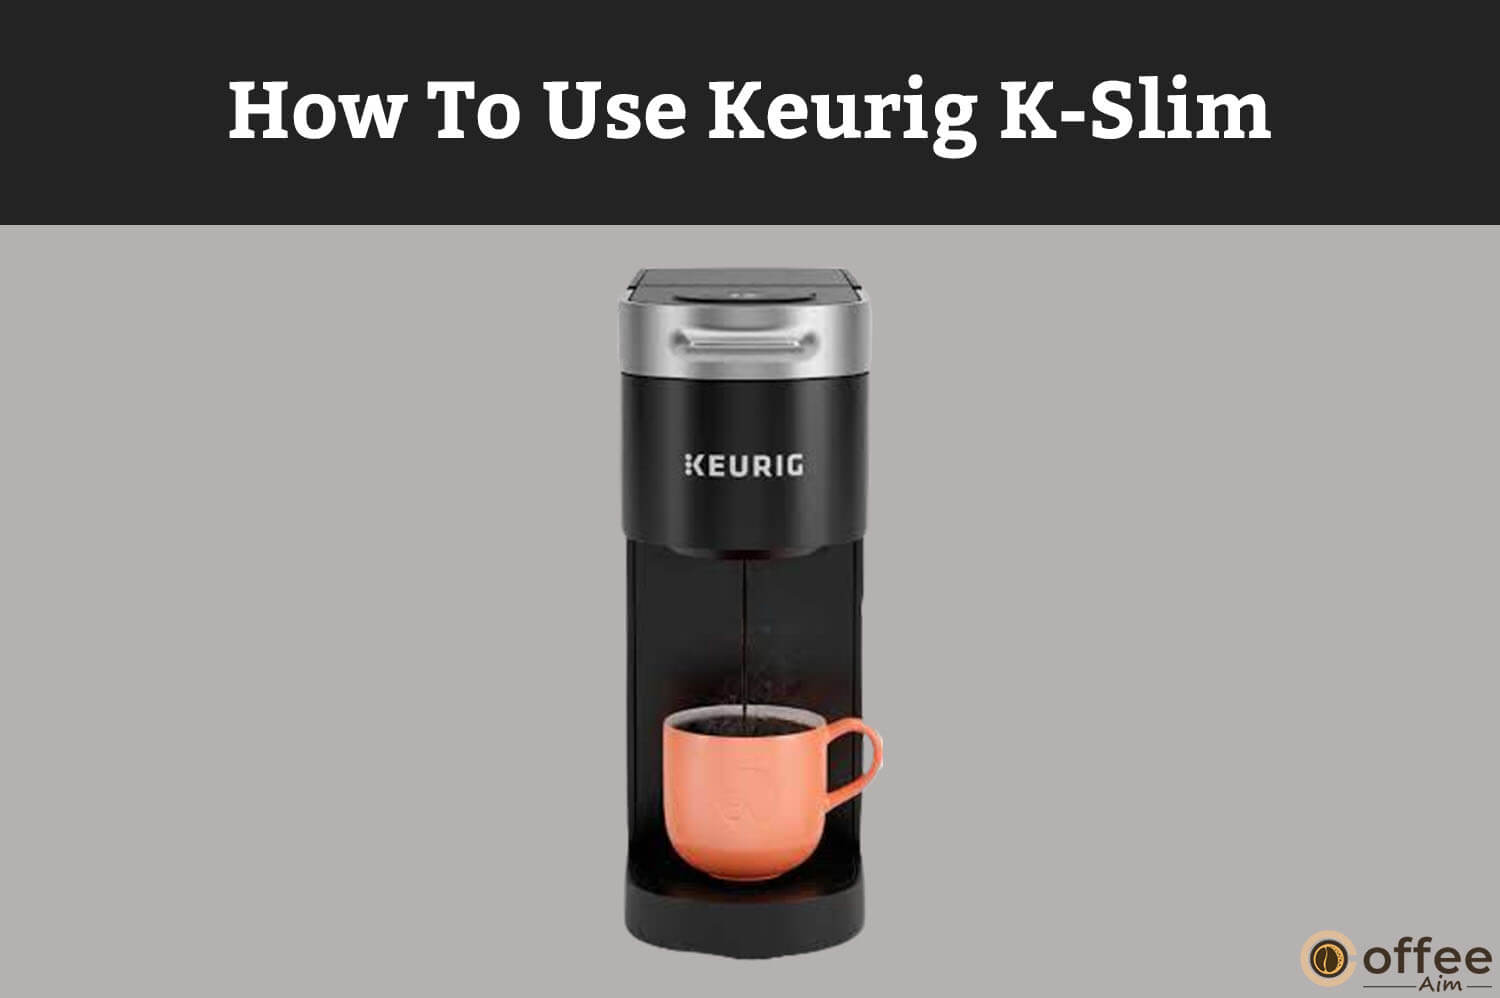 Featured image for the article "How To Use Keurig K-Slim"